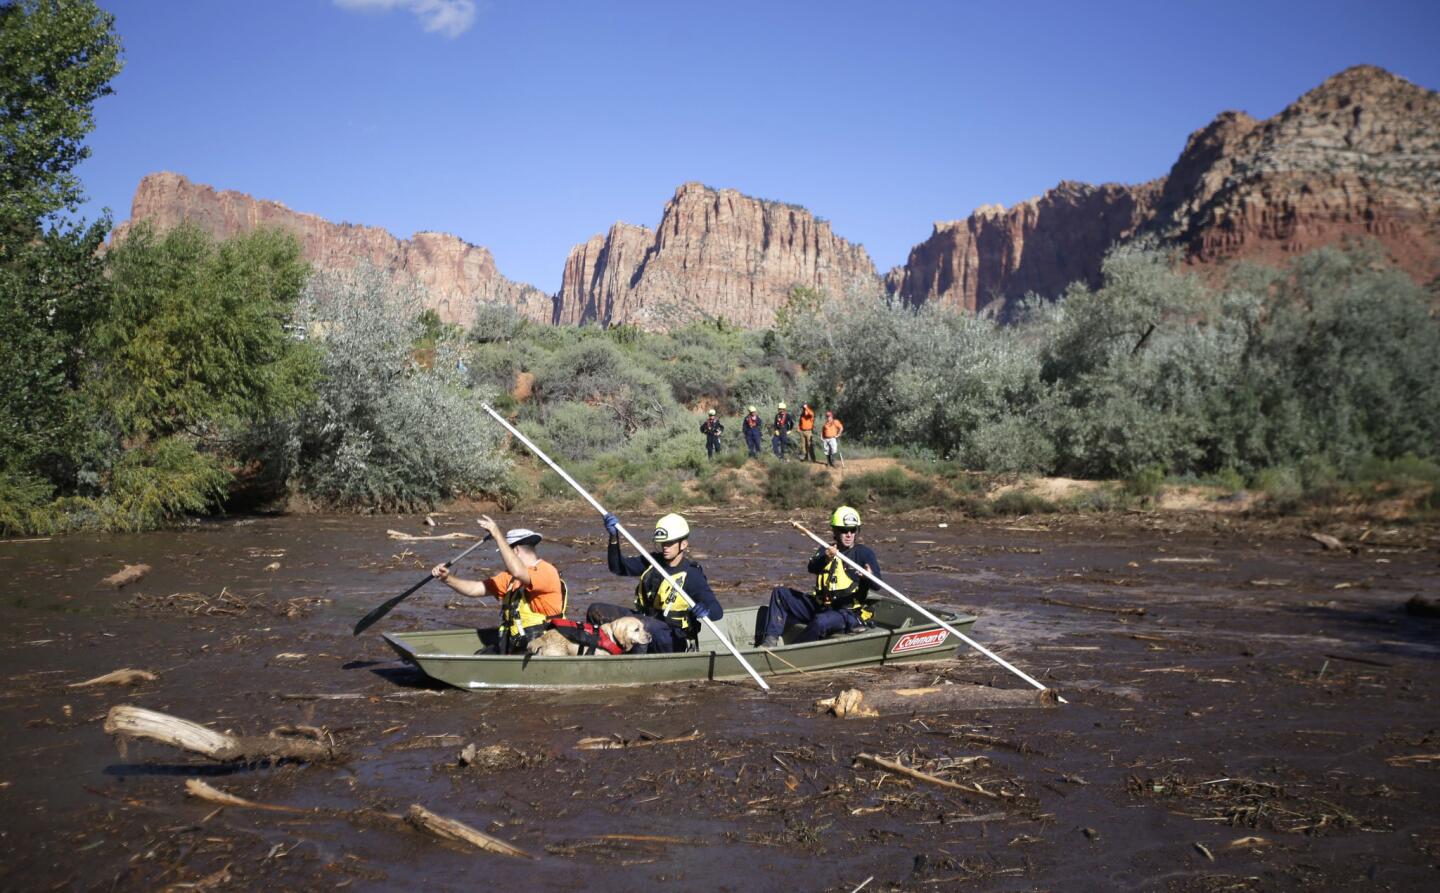 Searchers comb through mud and debris during a search for the remaining victims of a flash flood in Hildale, Utah. The flood water swept away multiple vehicles in the Utah-Arizona border town, killing several people.